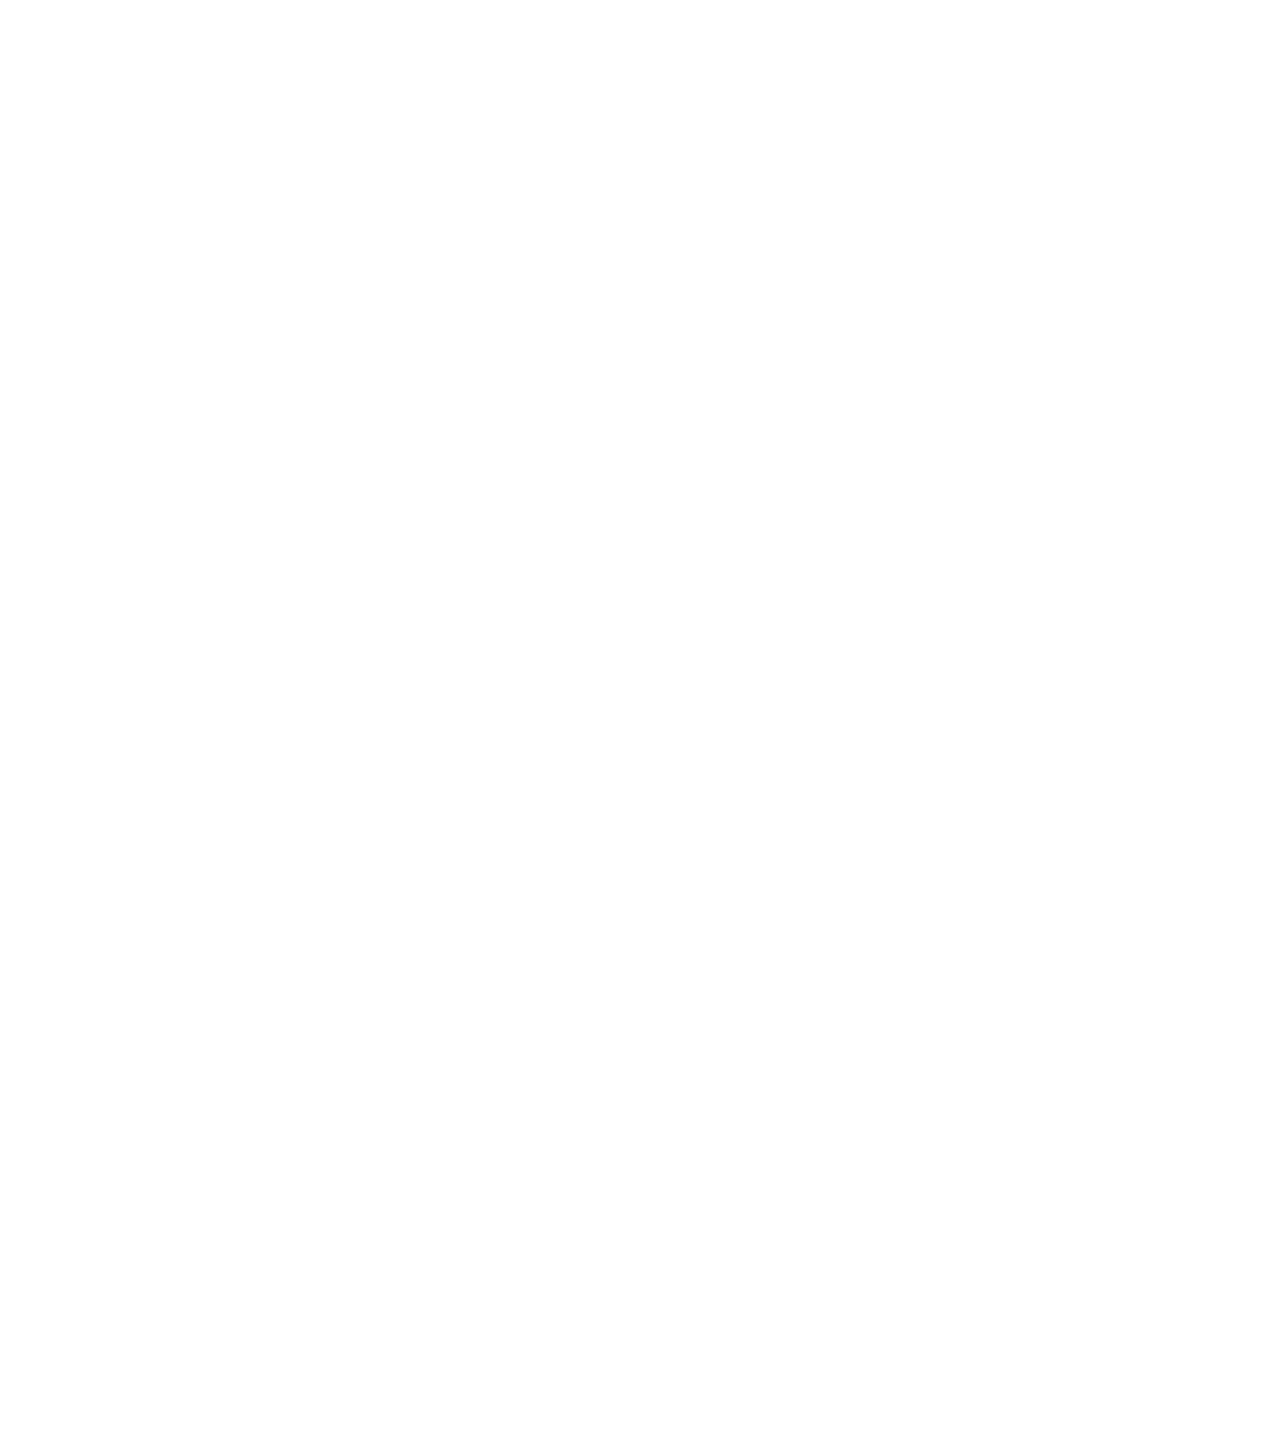 Mid Wales Therapy and Wellness's logo